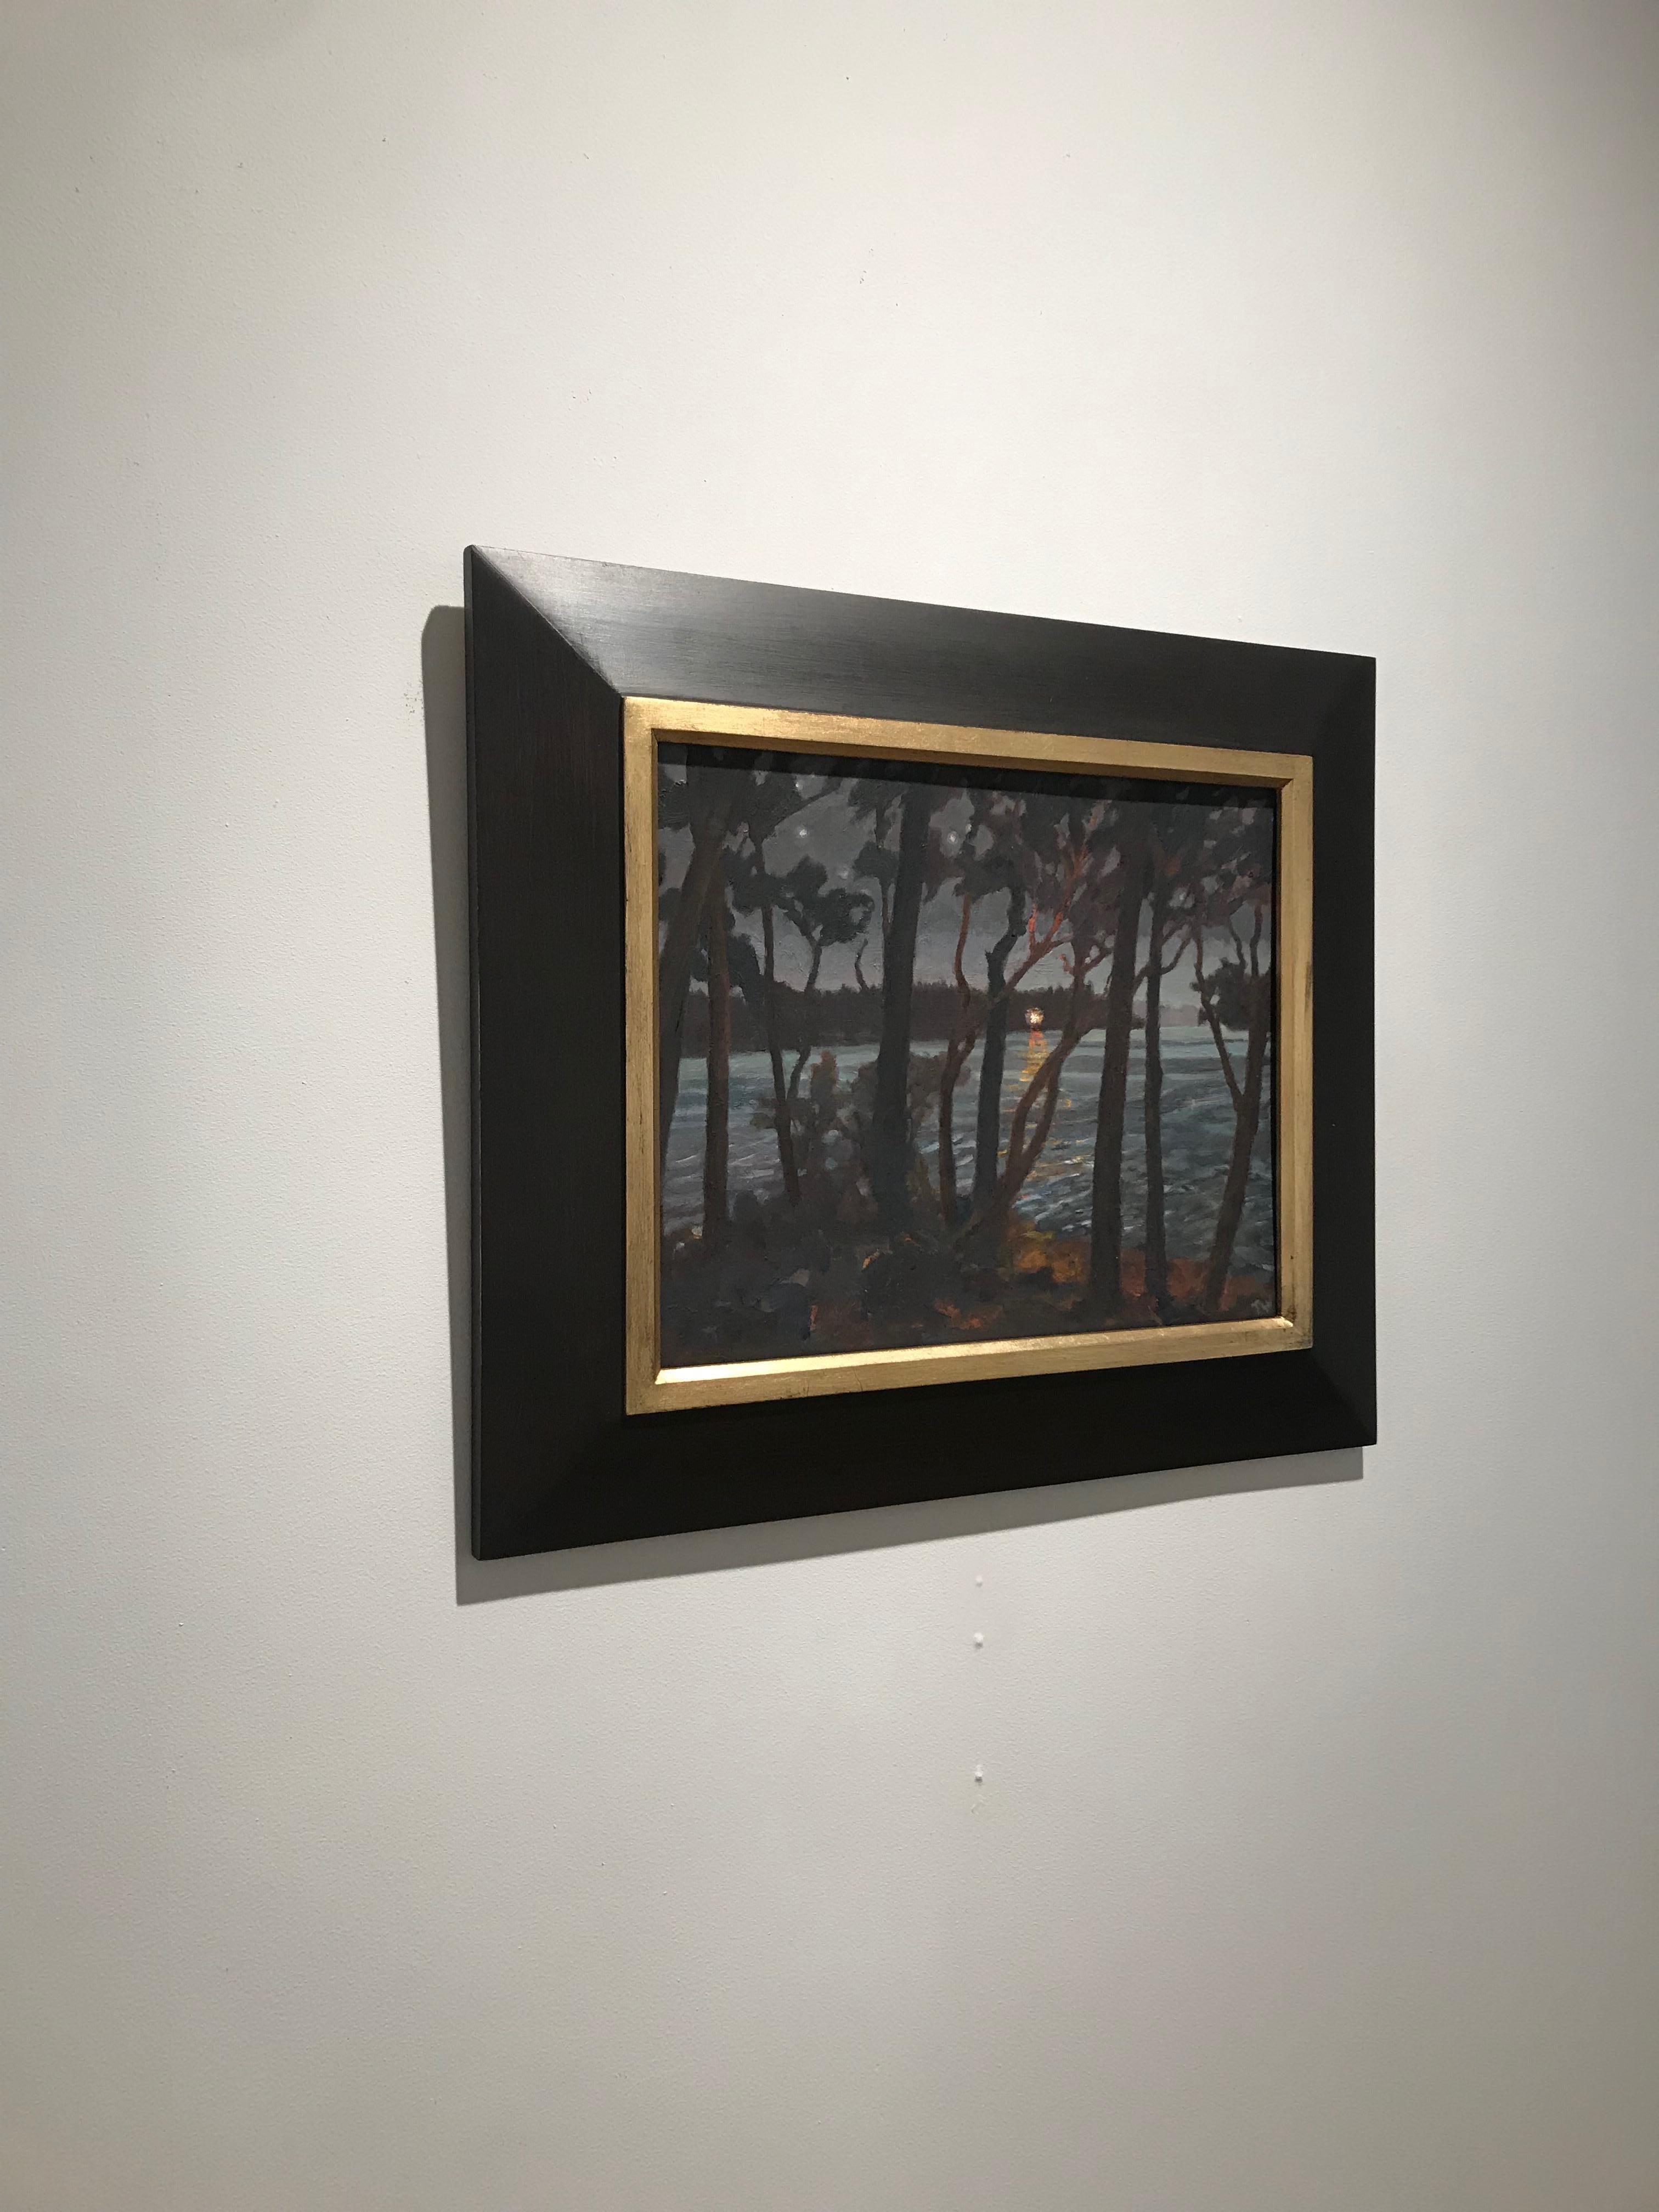 Thomas Wood is an established Pacific Northwest painter and award-winning printmaker who has exhibited nationally and internationally. Wood’s paintings often center on the sublime aspects of the wilderness, which he renders with a moody, lush, and